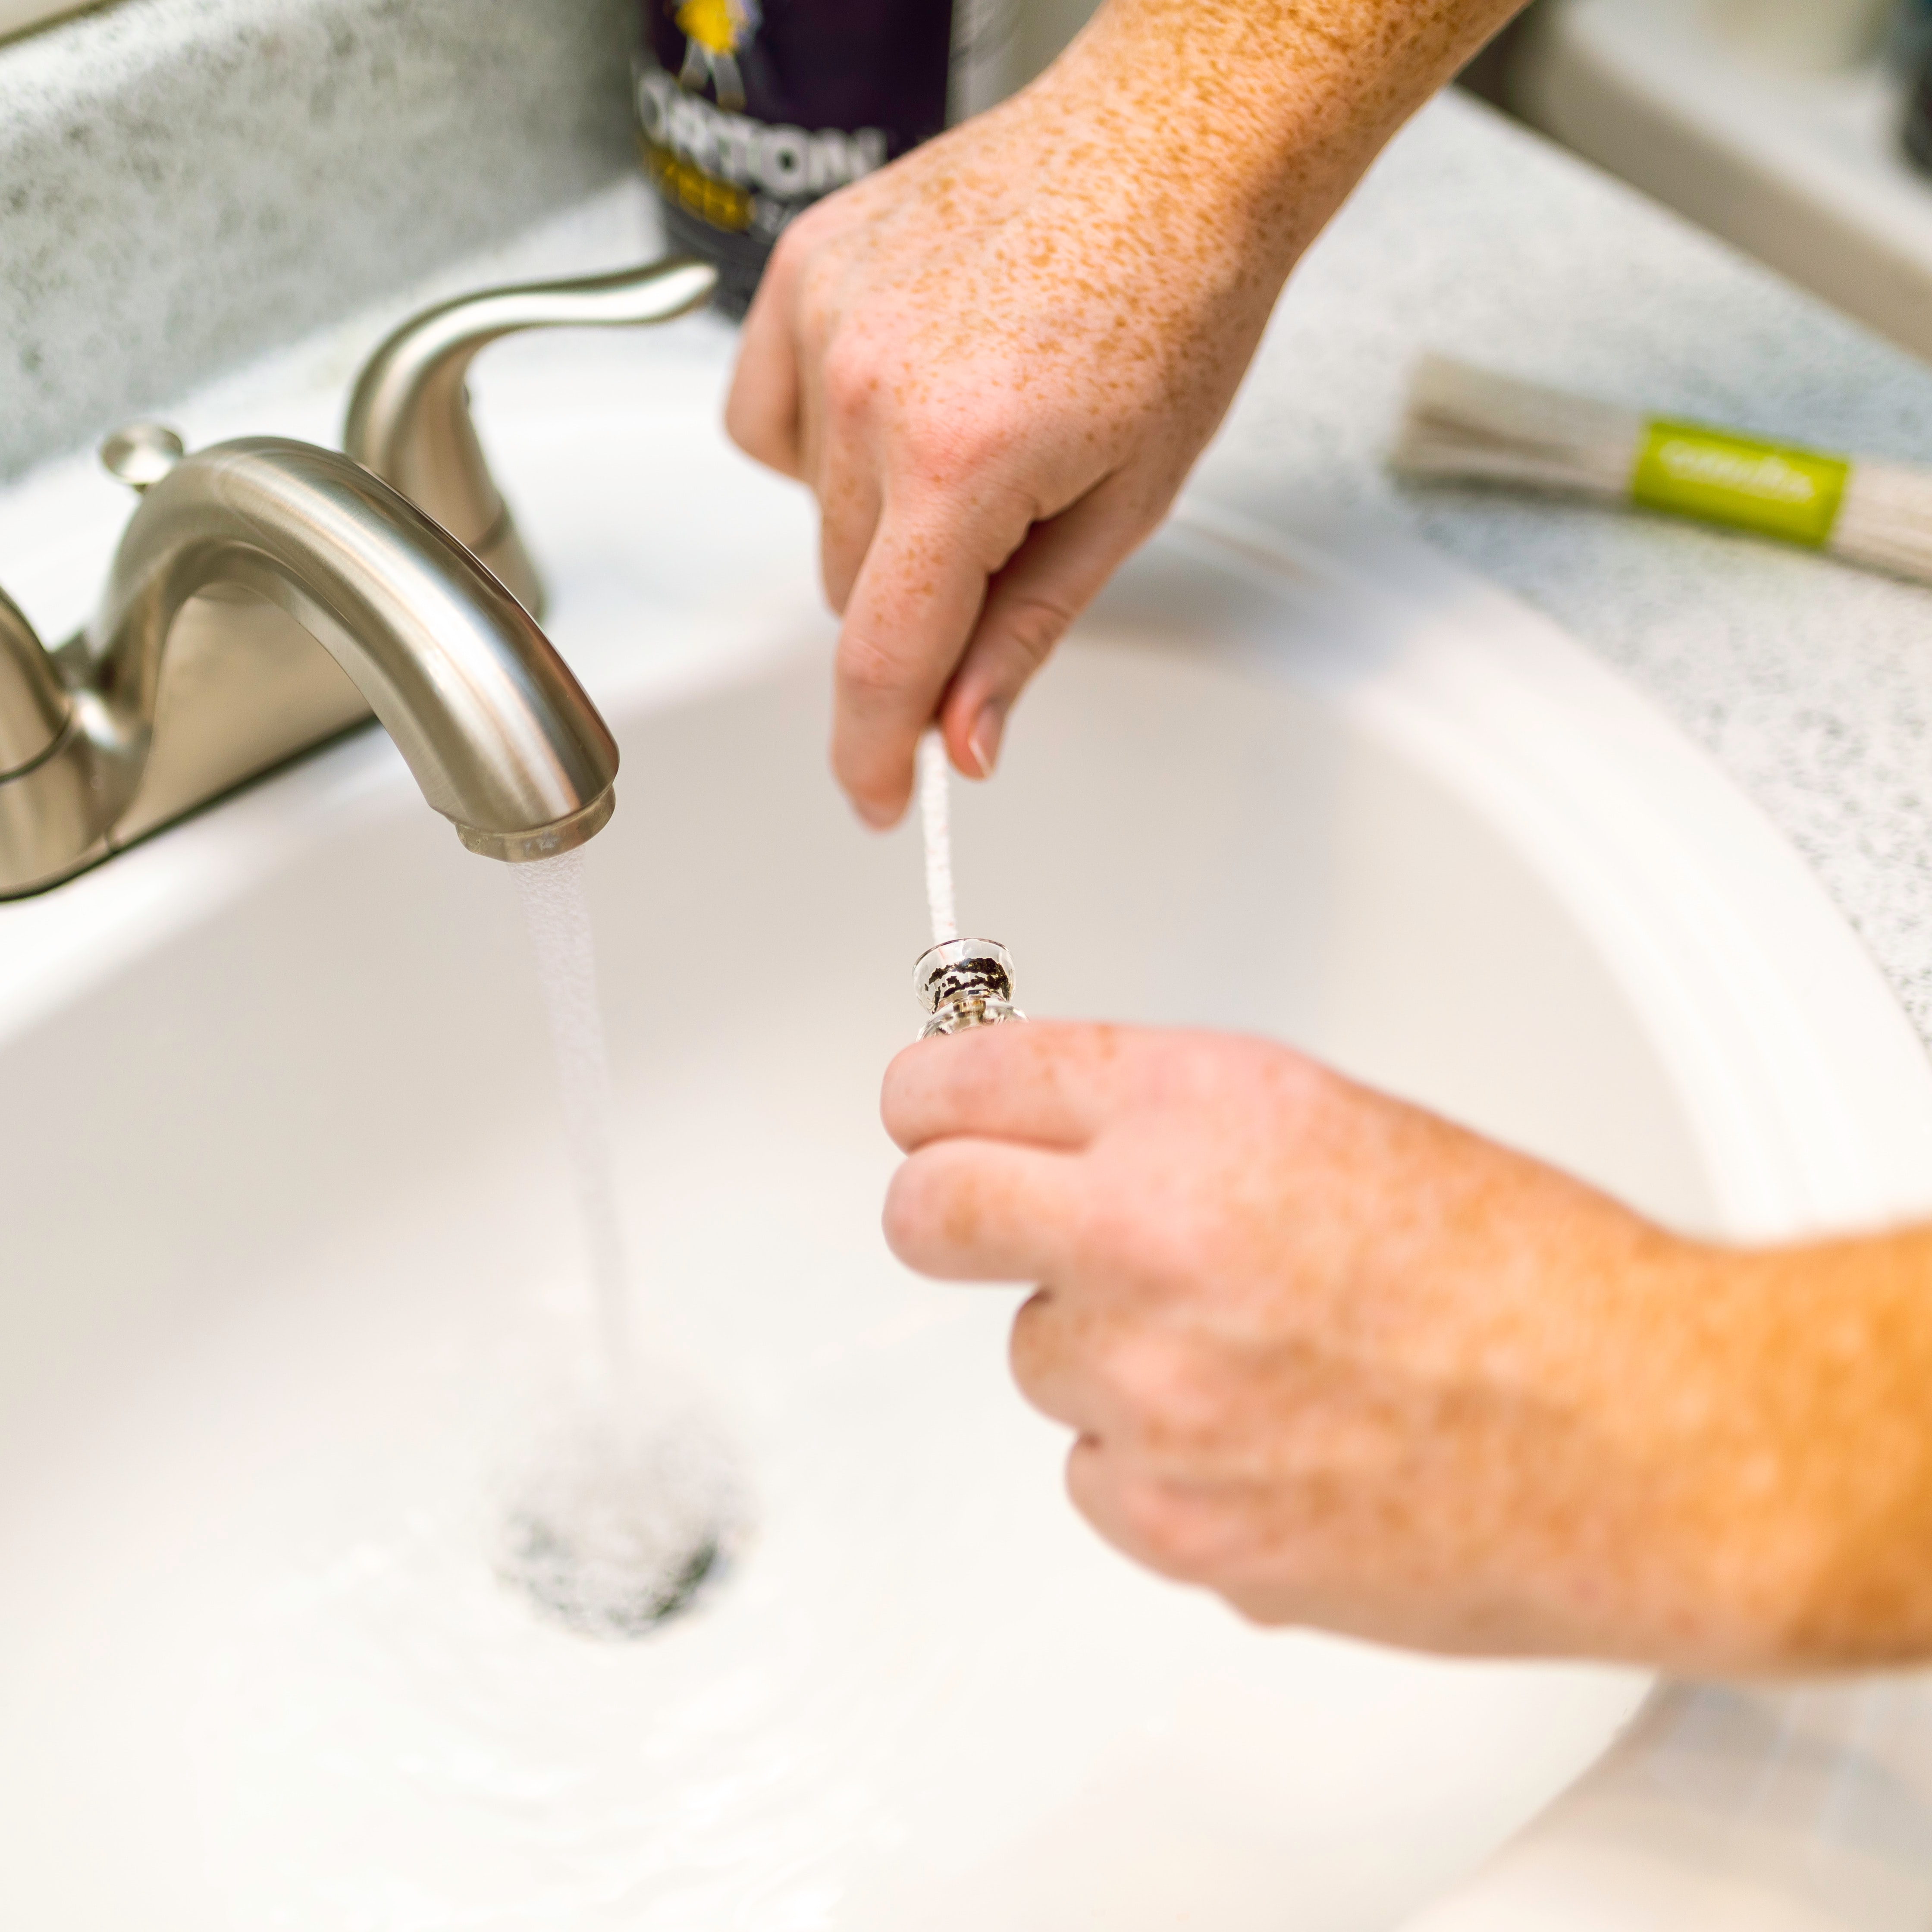 How To Have A Great Working Relationship With Your Plumber